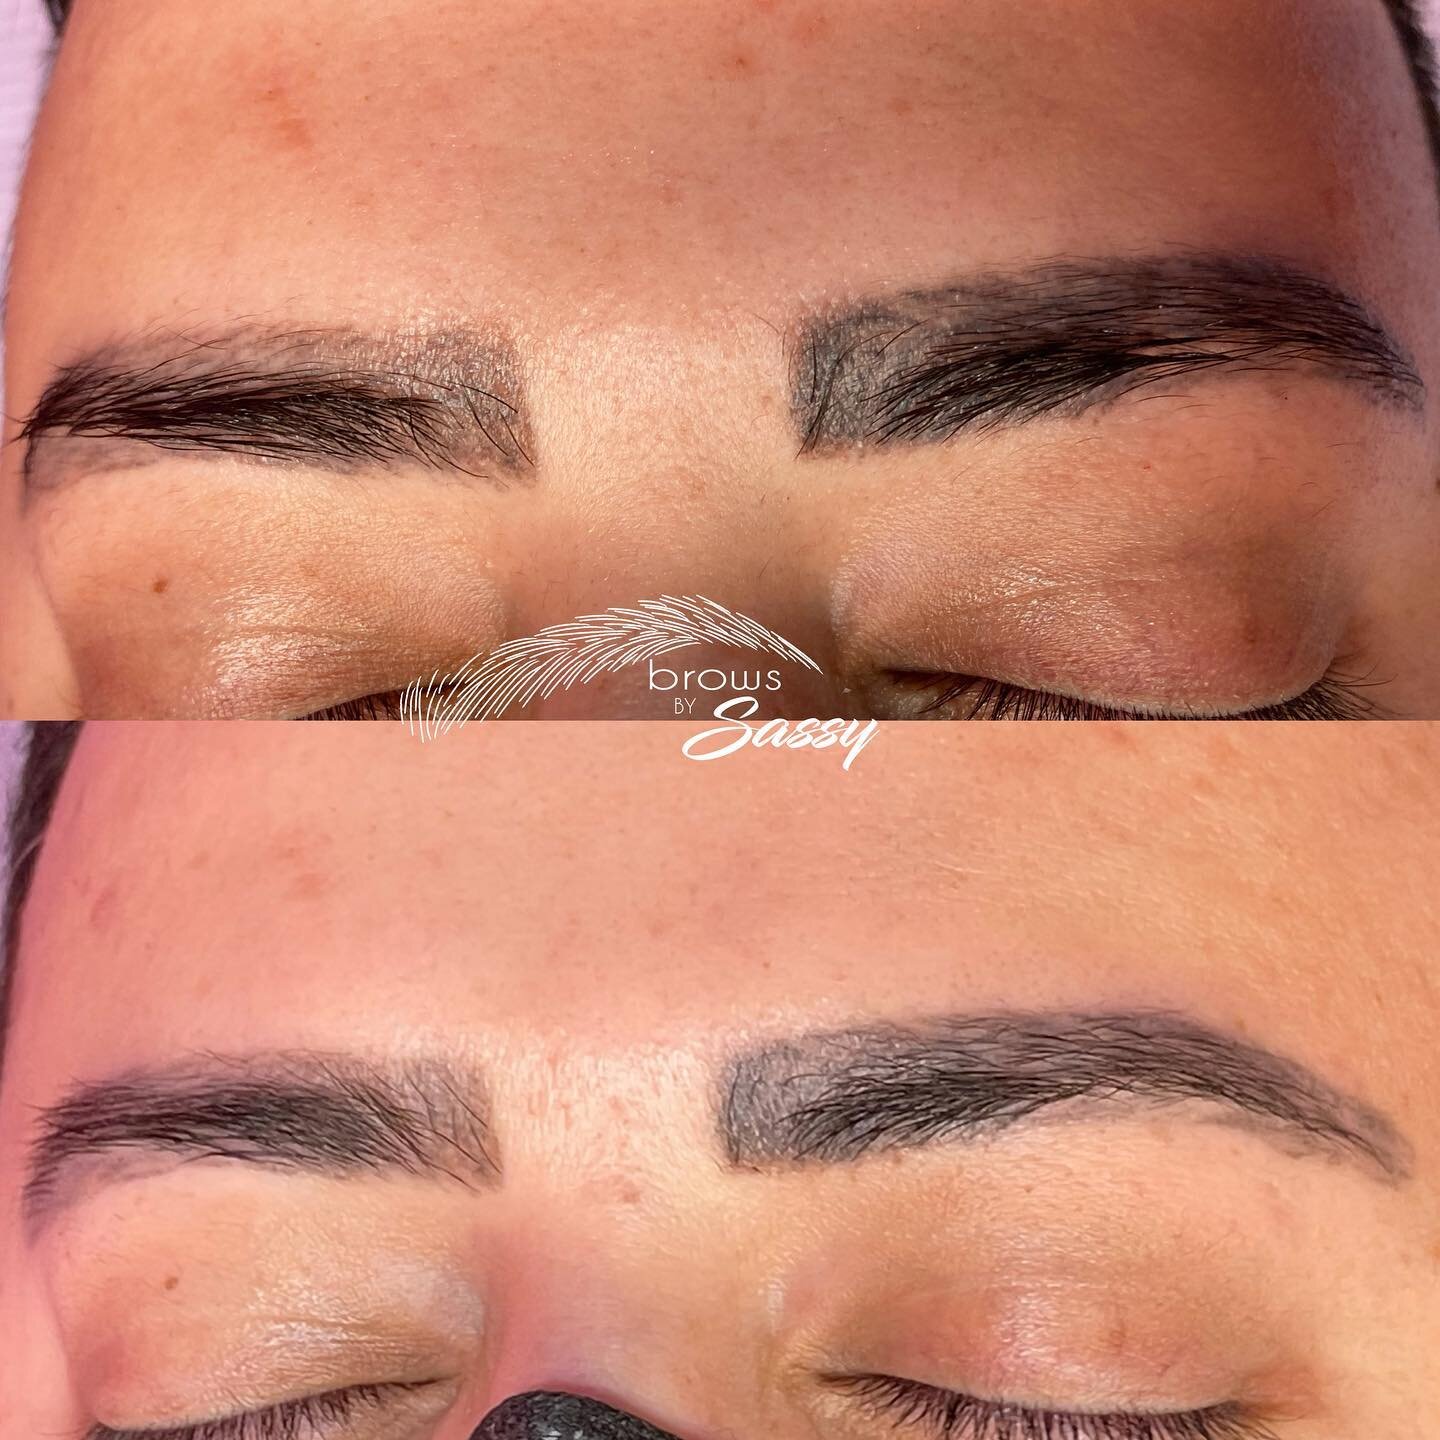 R E M O V A L
top photo is the before 
bottom is after 1st session 
Removal is a long process but definitely worth it. For any information please message me. I do offer small tattoo removal!